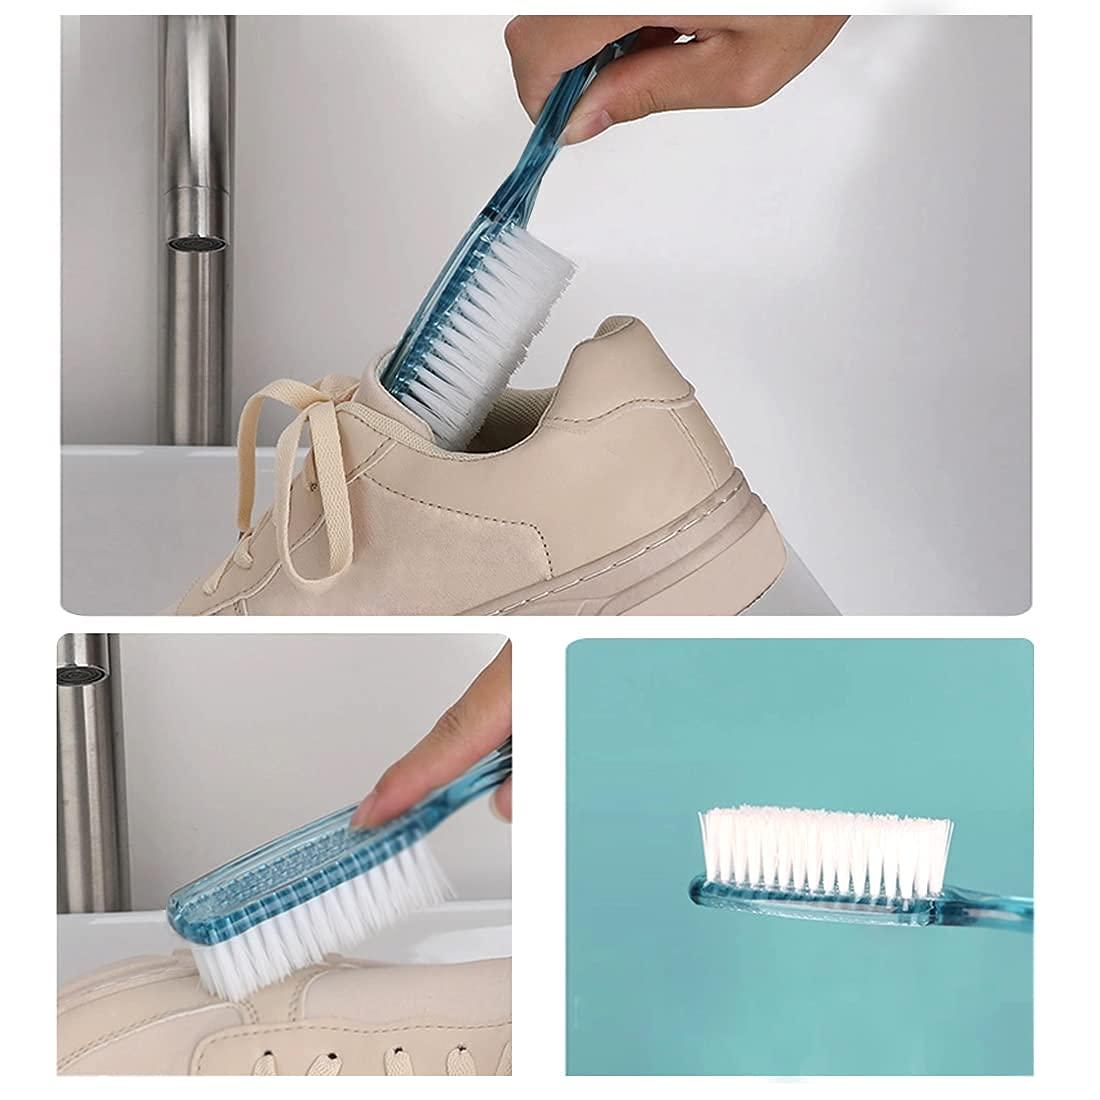 Cleaning Brush Household Small Laundry Brush for Soft Bristle Scrub Clothes  Shoe Fabric Hand Cleaning Brush